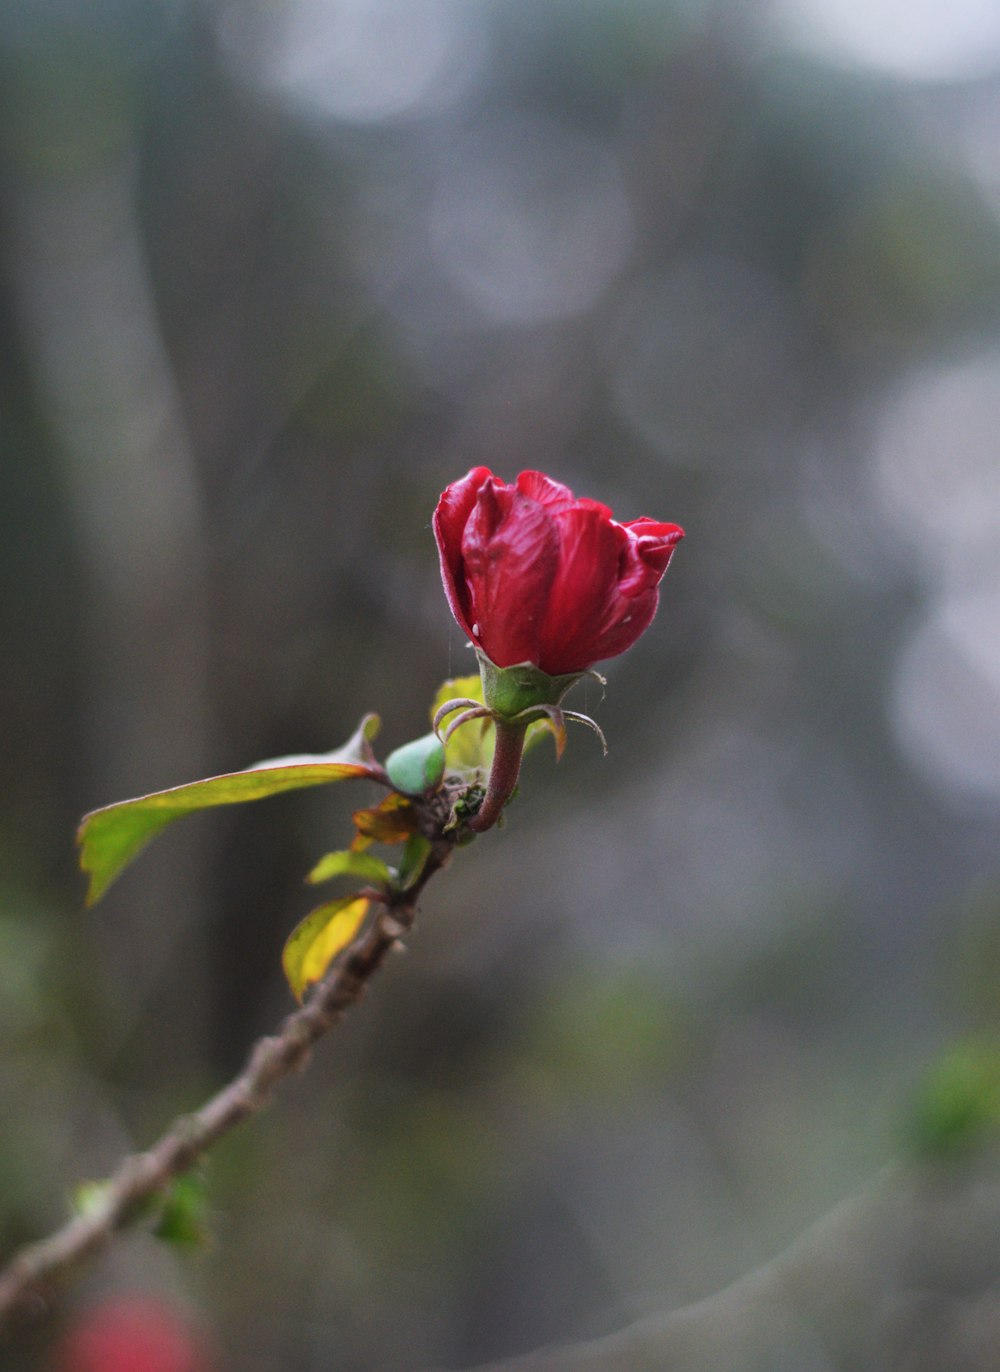 a single red rose bud on a tree branch